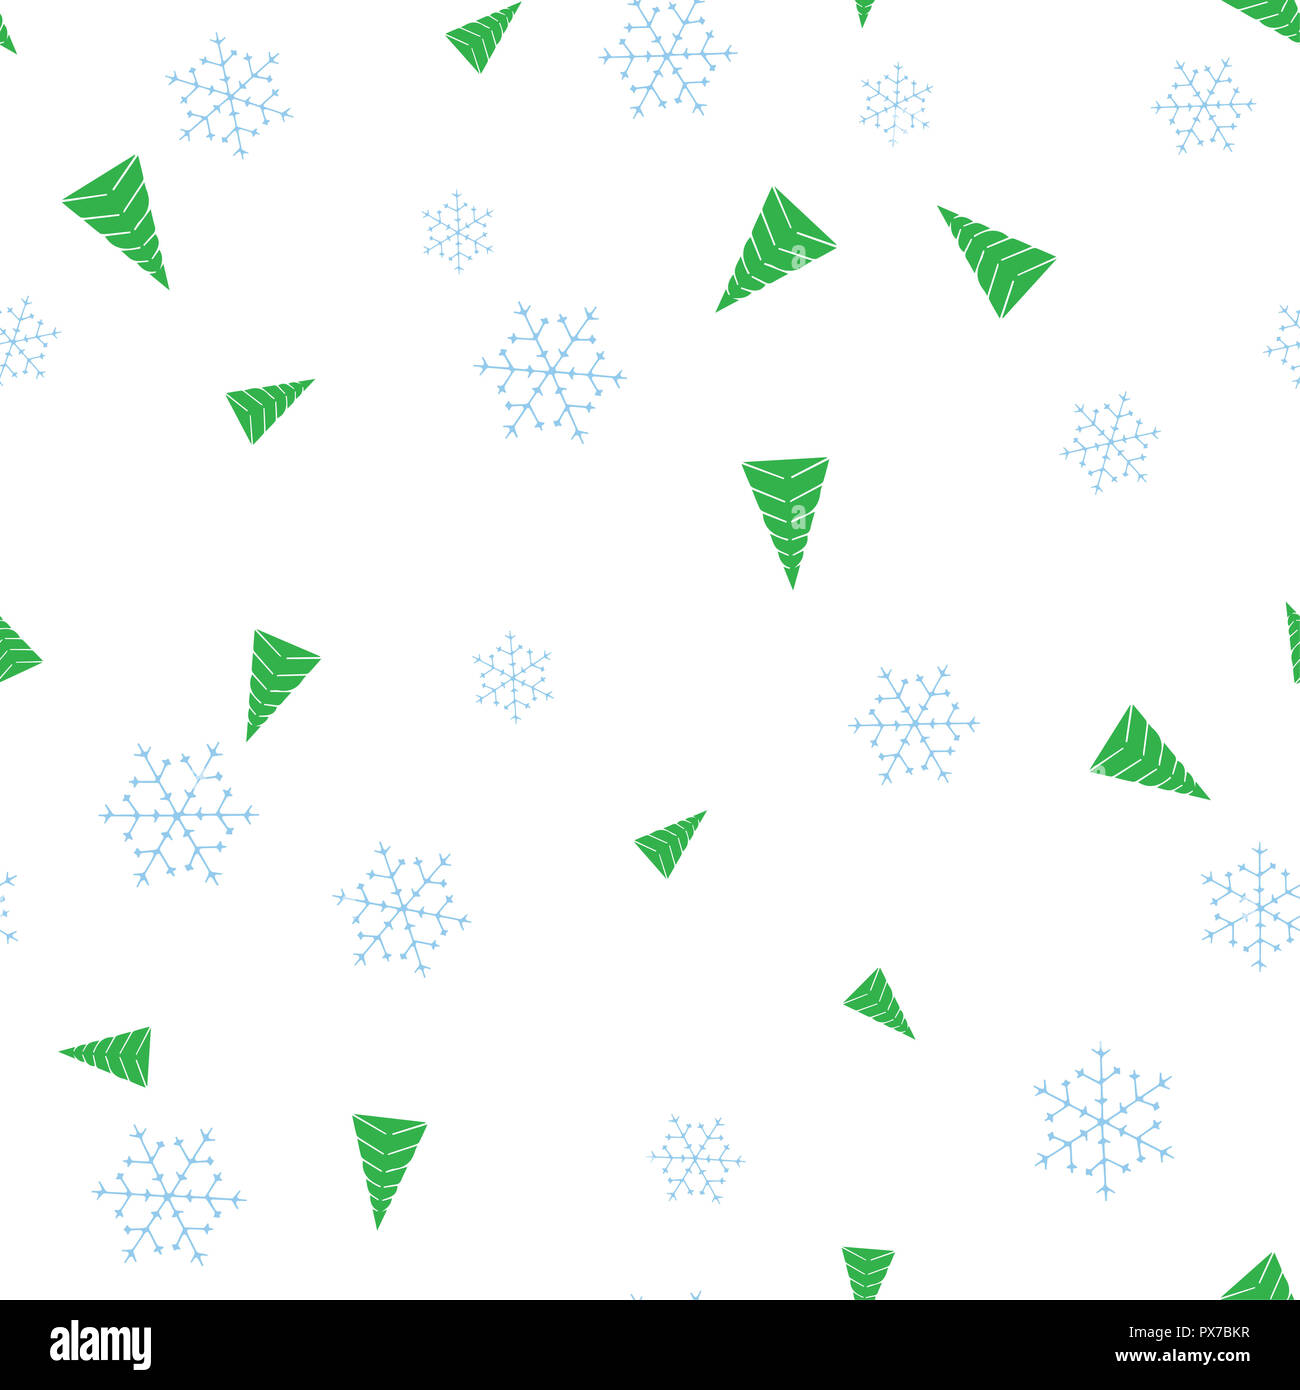 Green Christmas tree and snowflake seamless pattern. Isolated on a white background.  illustration. Stock Photo